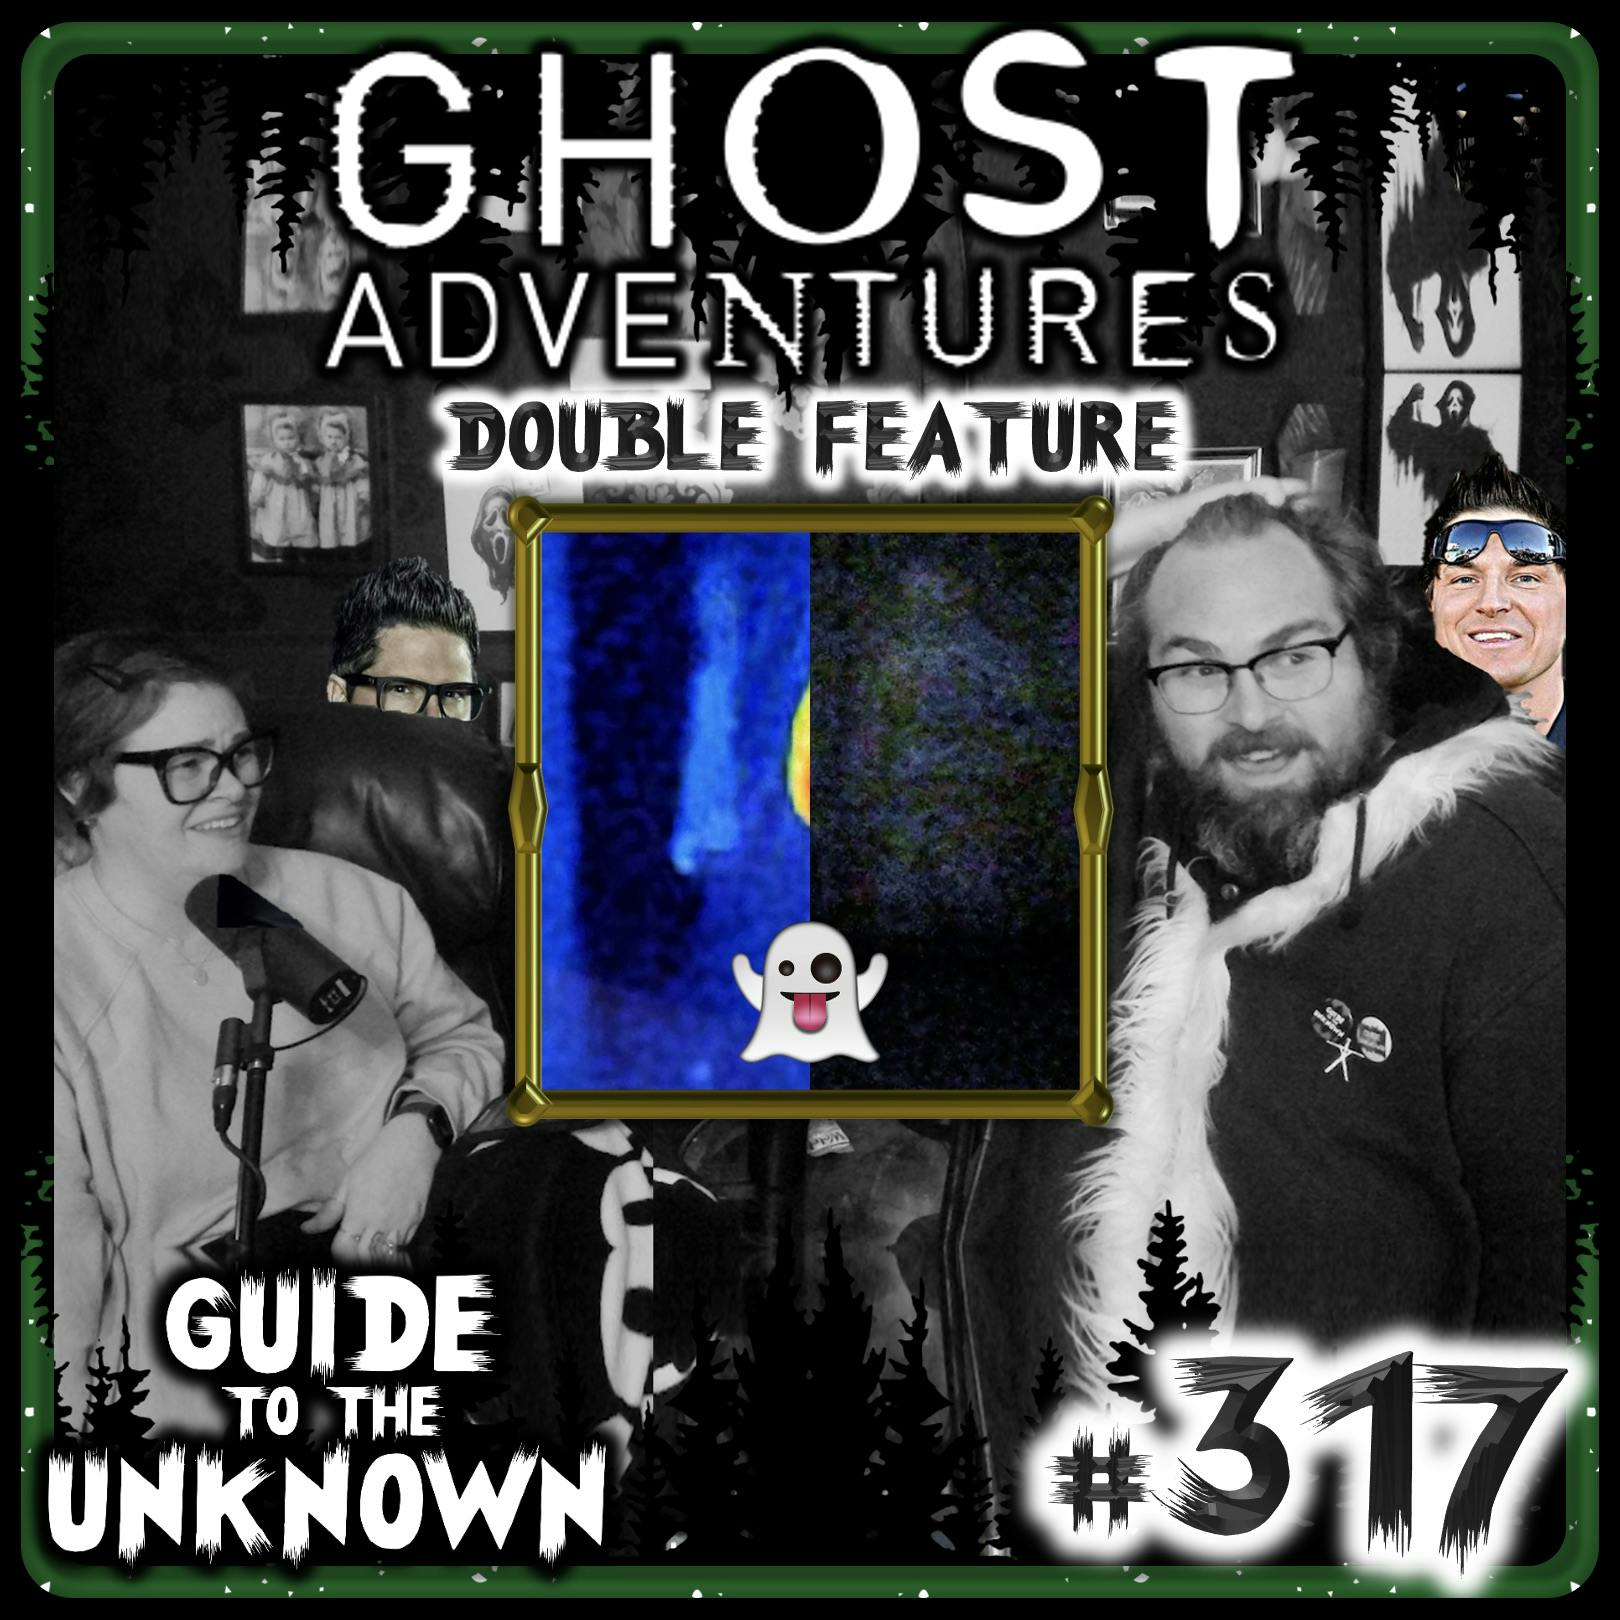 317: GHOST ADVENTURES Double Feature